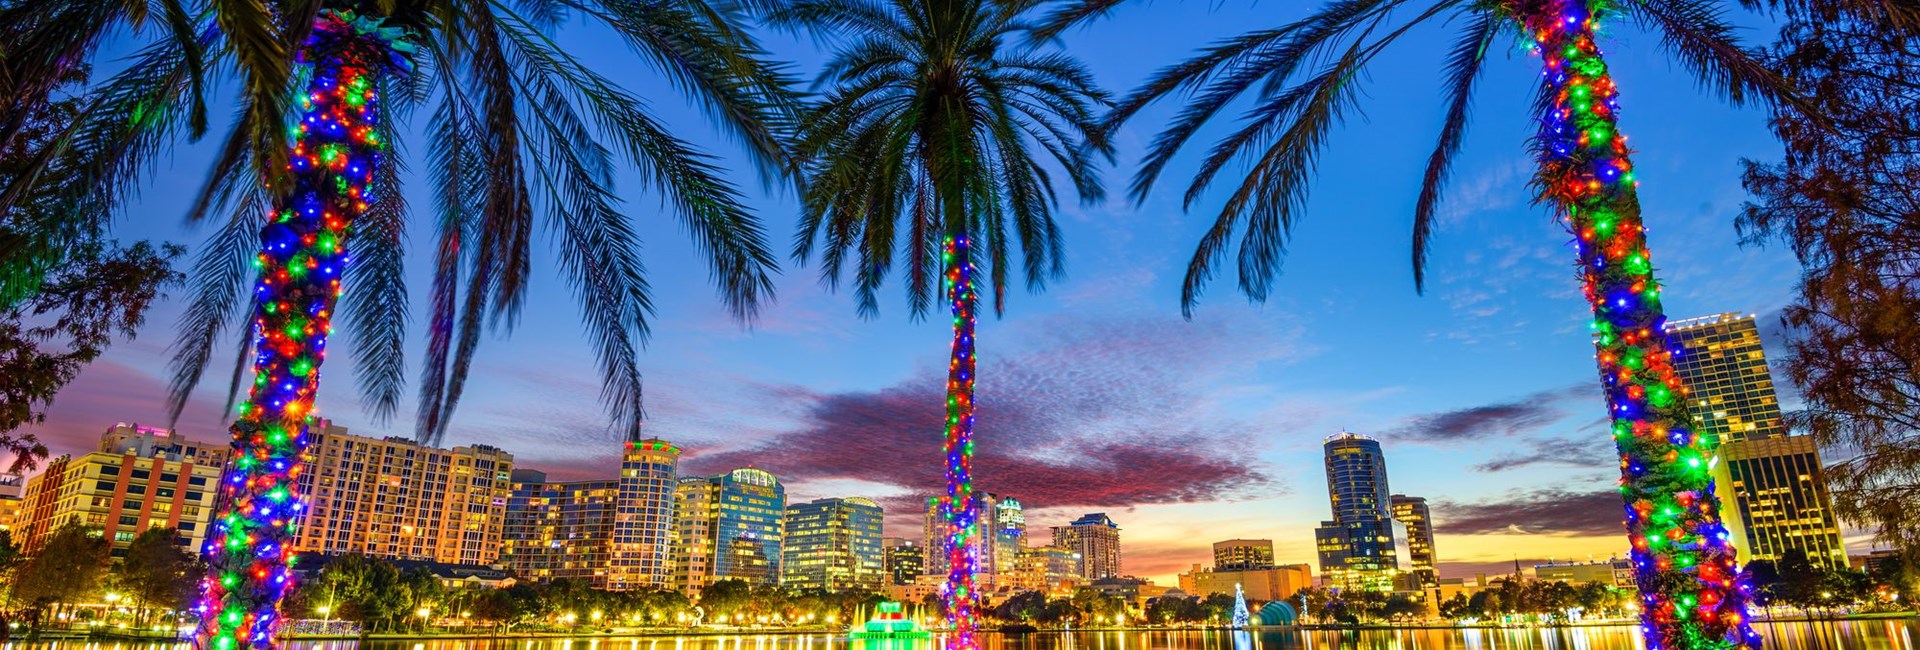 colourful fairy lights wrapped around palm trees in Orlando nighttime cityscape